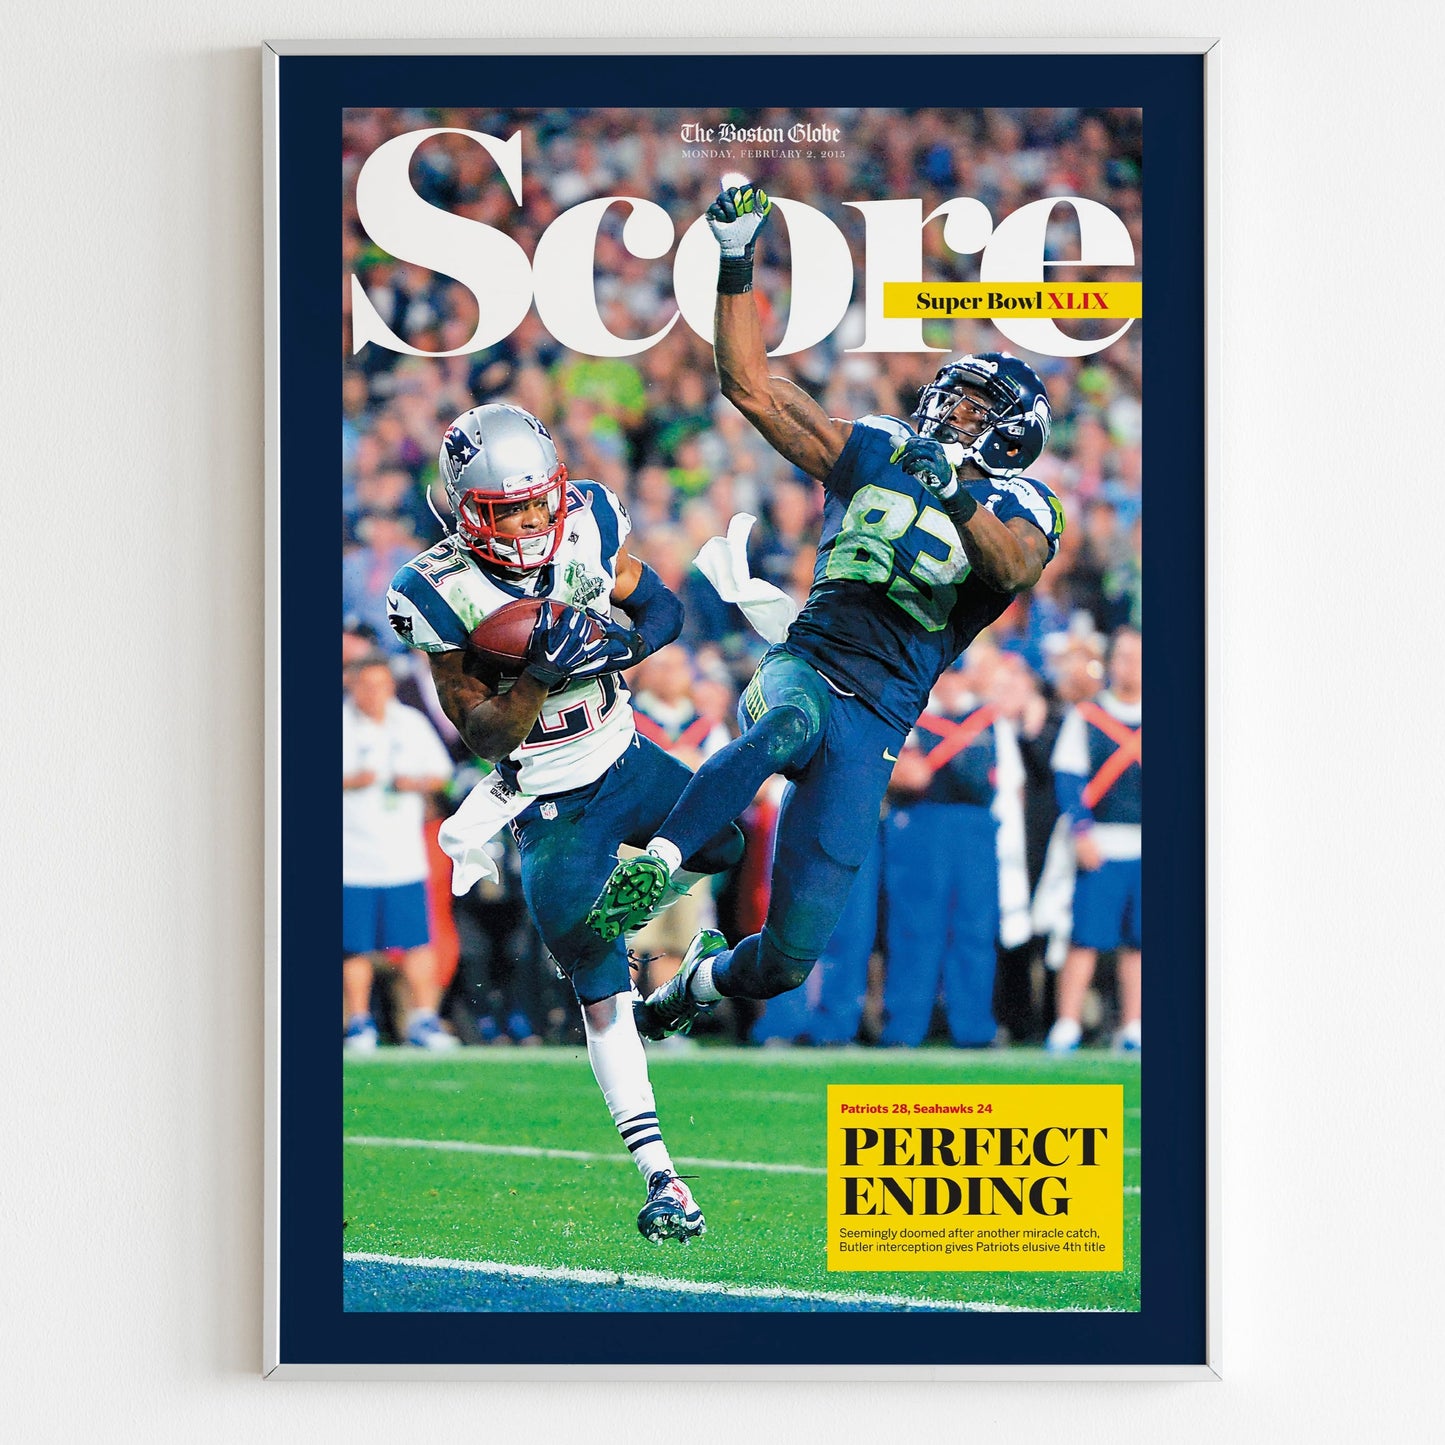 New England Patriots 2015 Super Bowl NFL Champions Front Cover The Boston Globe Newspaper Poster, Football Team Print, Magazine Page Poster